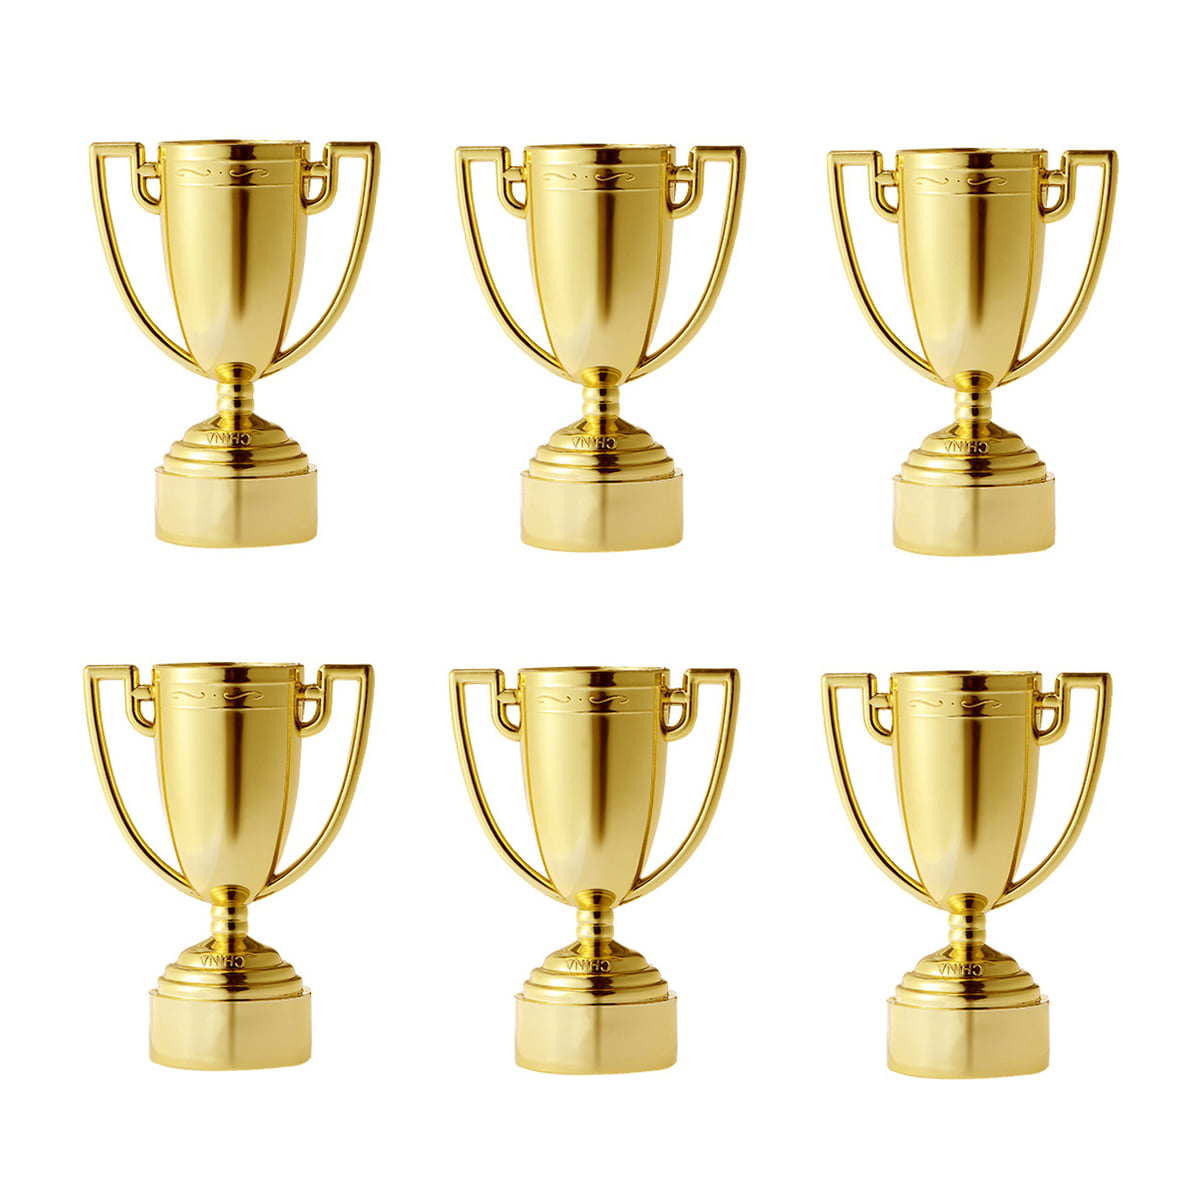 Competitions Max Fun 36 pcs Kids Childrens Gold Plastic Winner Award Medals Trophies Set for Sports Celebration Party Favors